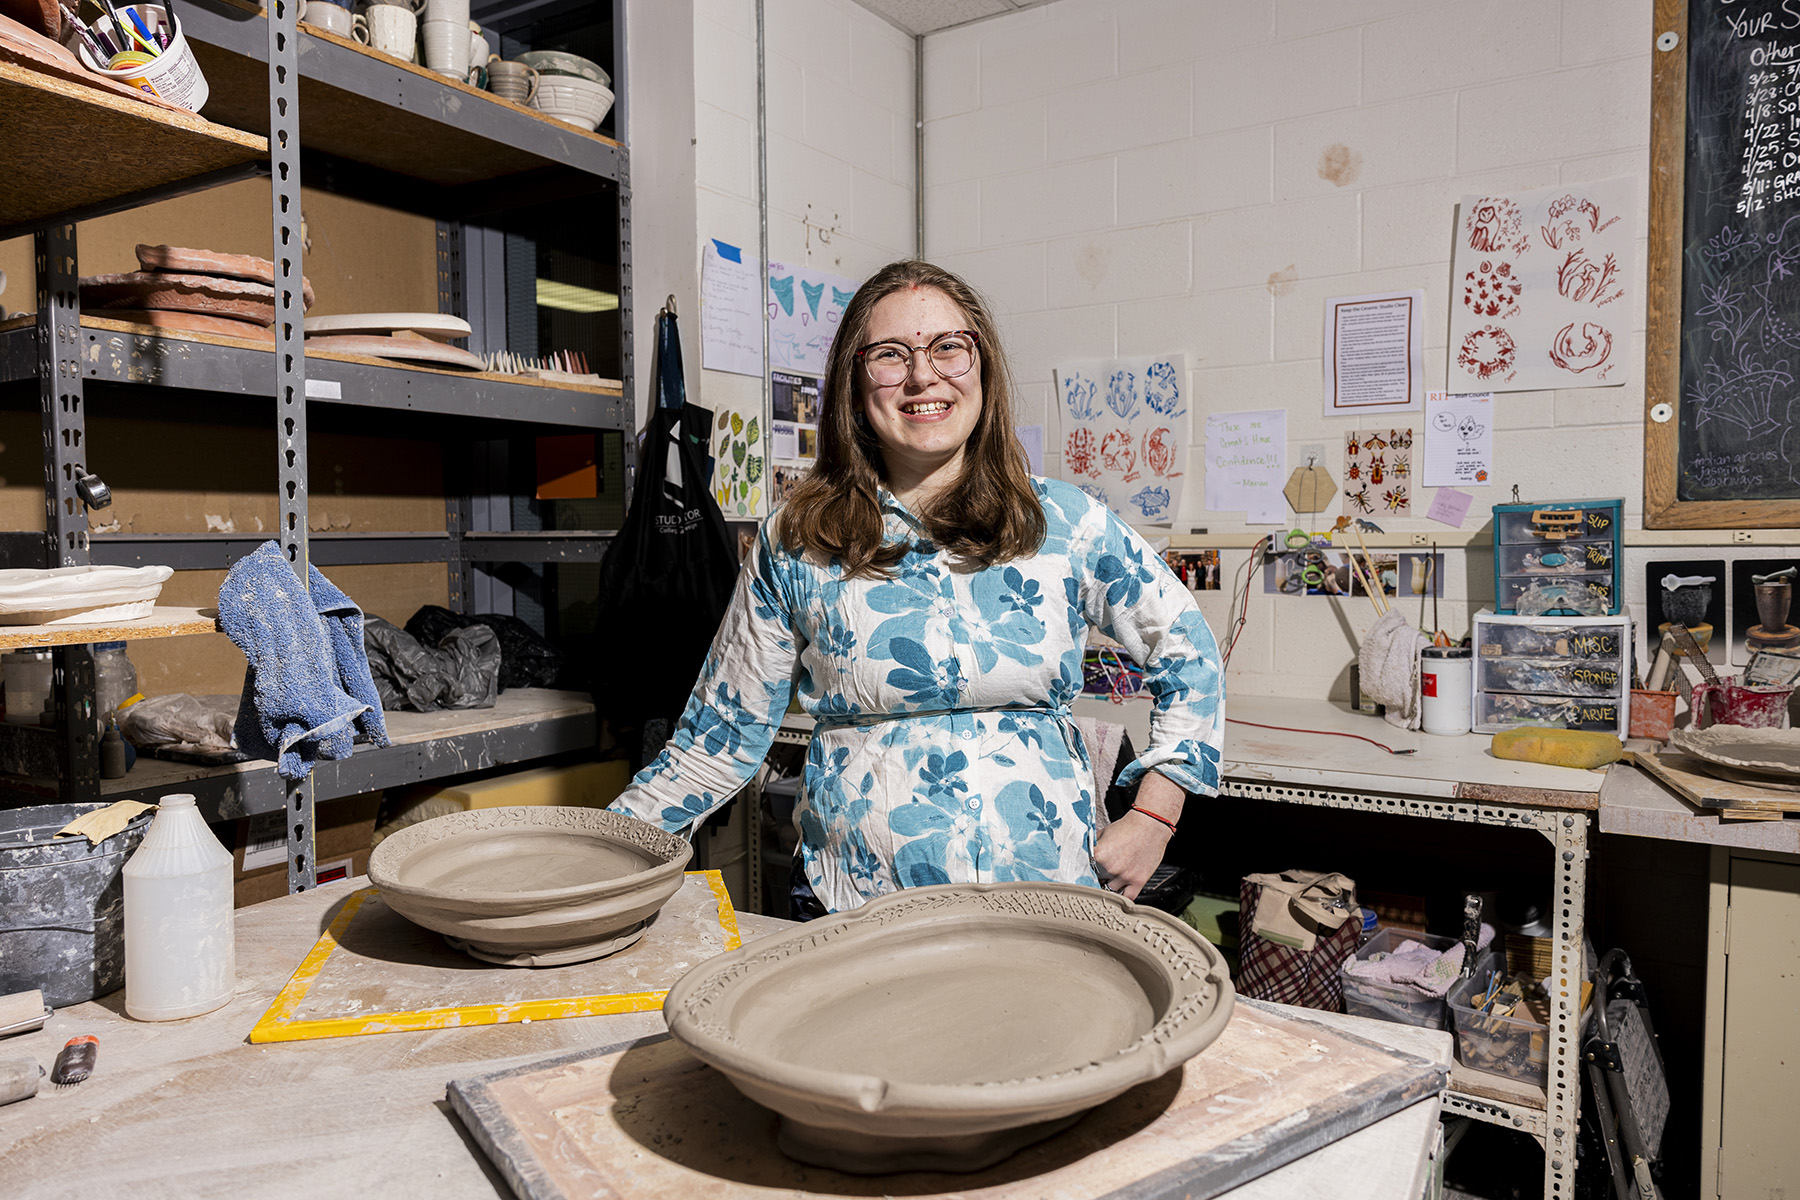 Emma Herz Thakur in the studio with ceramic plates she made.